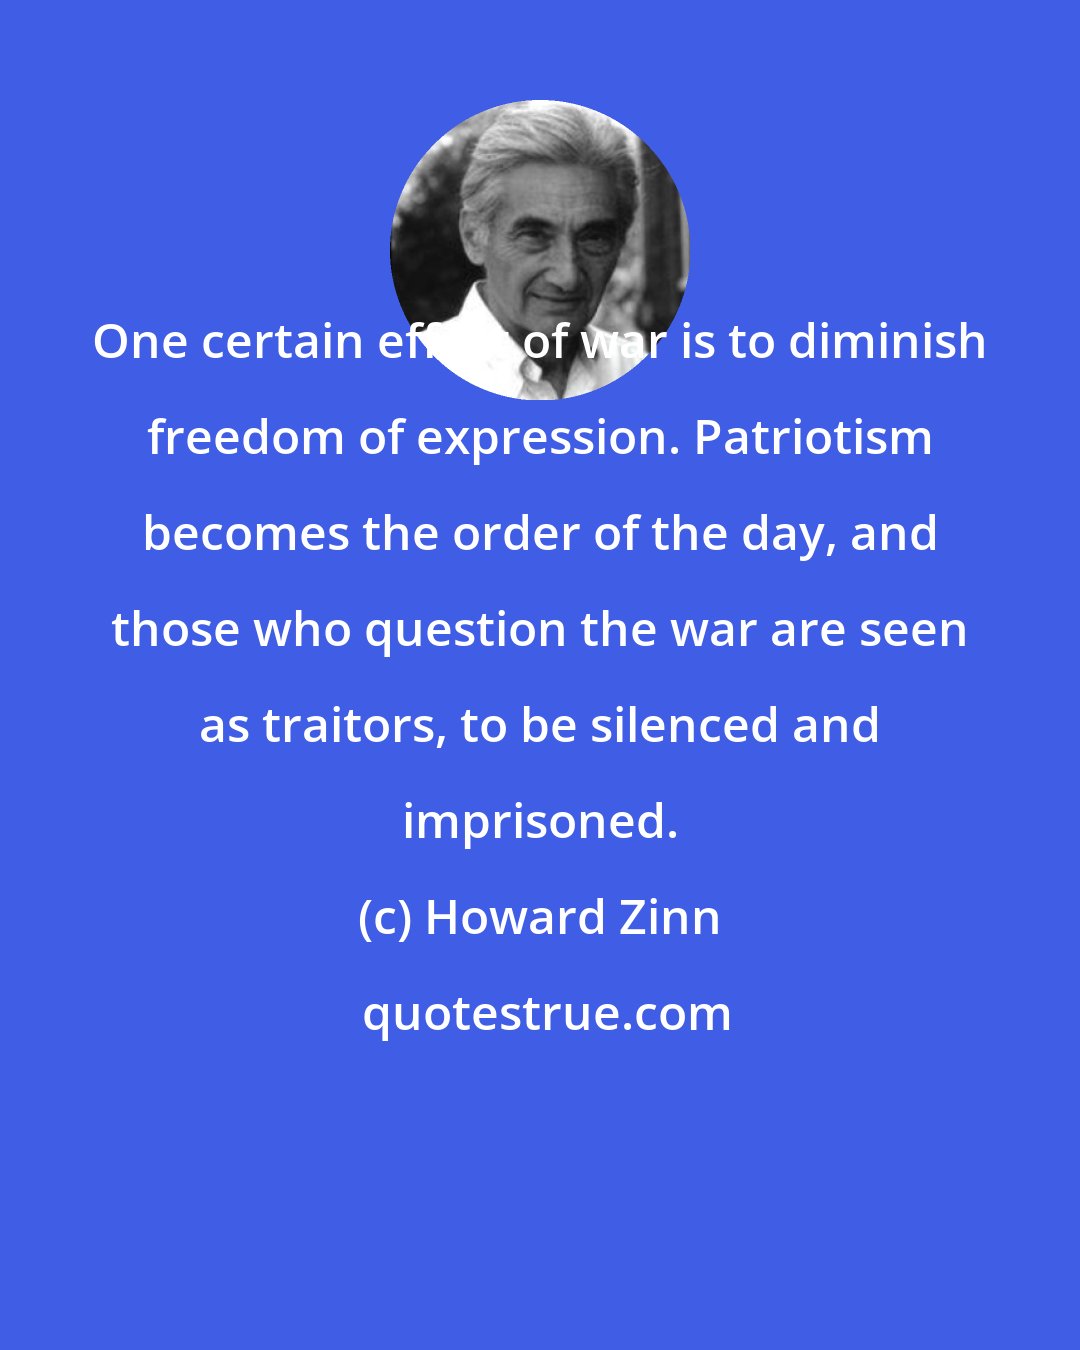 Howard Zinn: One certain effect of war is to diminish freedom of expression. Patriotism becomes the order of the day, and those who question the war are seen as traitors, to be silenced and imprisoned.